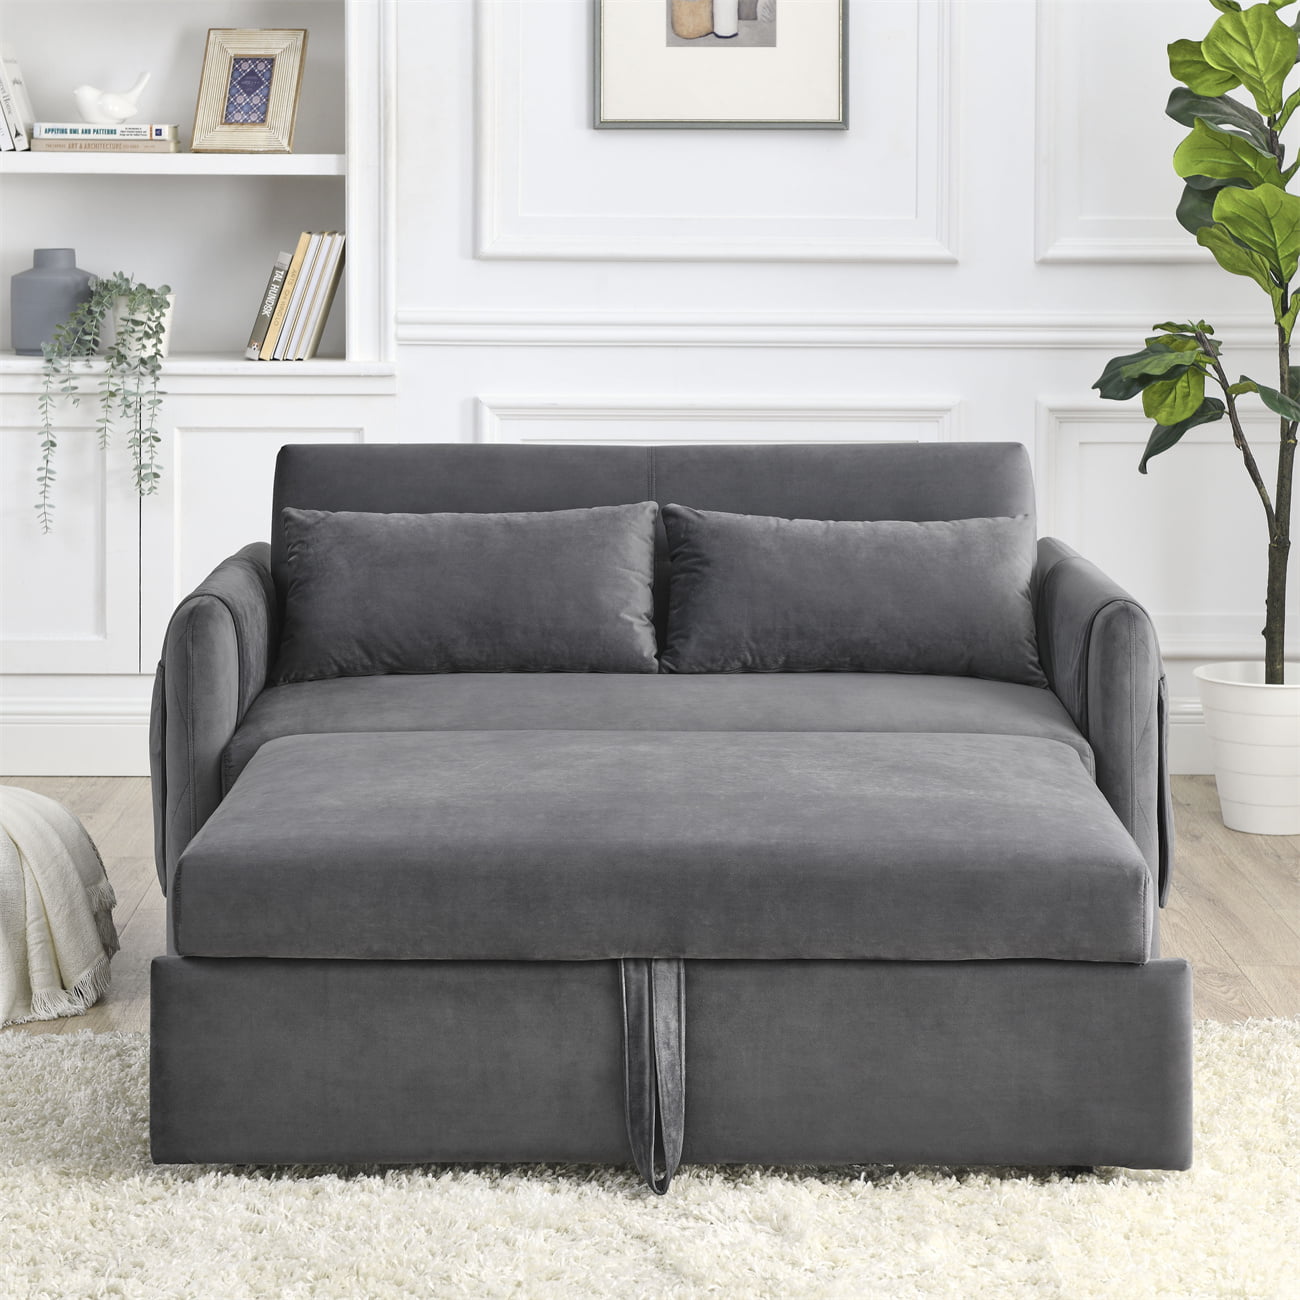 Acht kaping grijs 55" Convertible Sofa Bed, Velvet Loveseat Sofa with 2 Detachable Arm  Pockets, Sofa Couch with Pull Out Bed, 2 Pillows and Adjustable Backrest,  Living Room Sofa with Grid Design Armrests, Black - Walmart.com